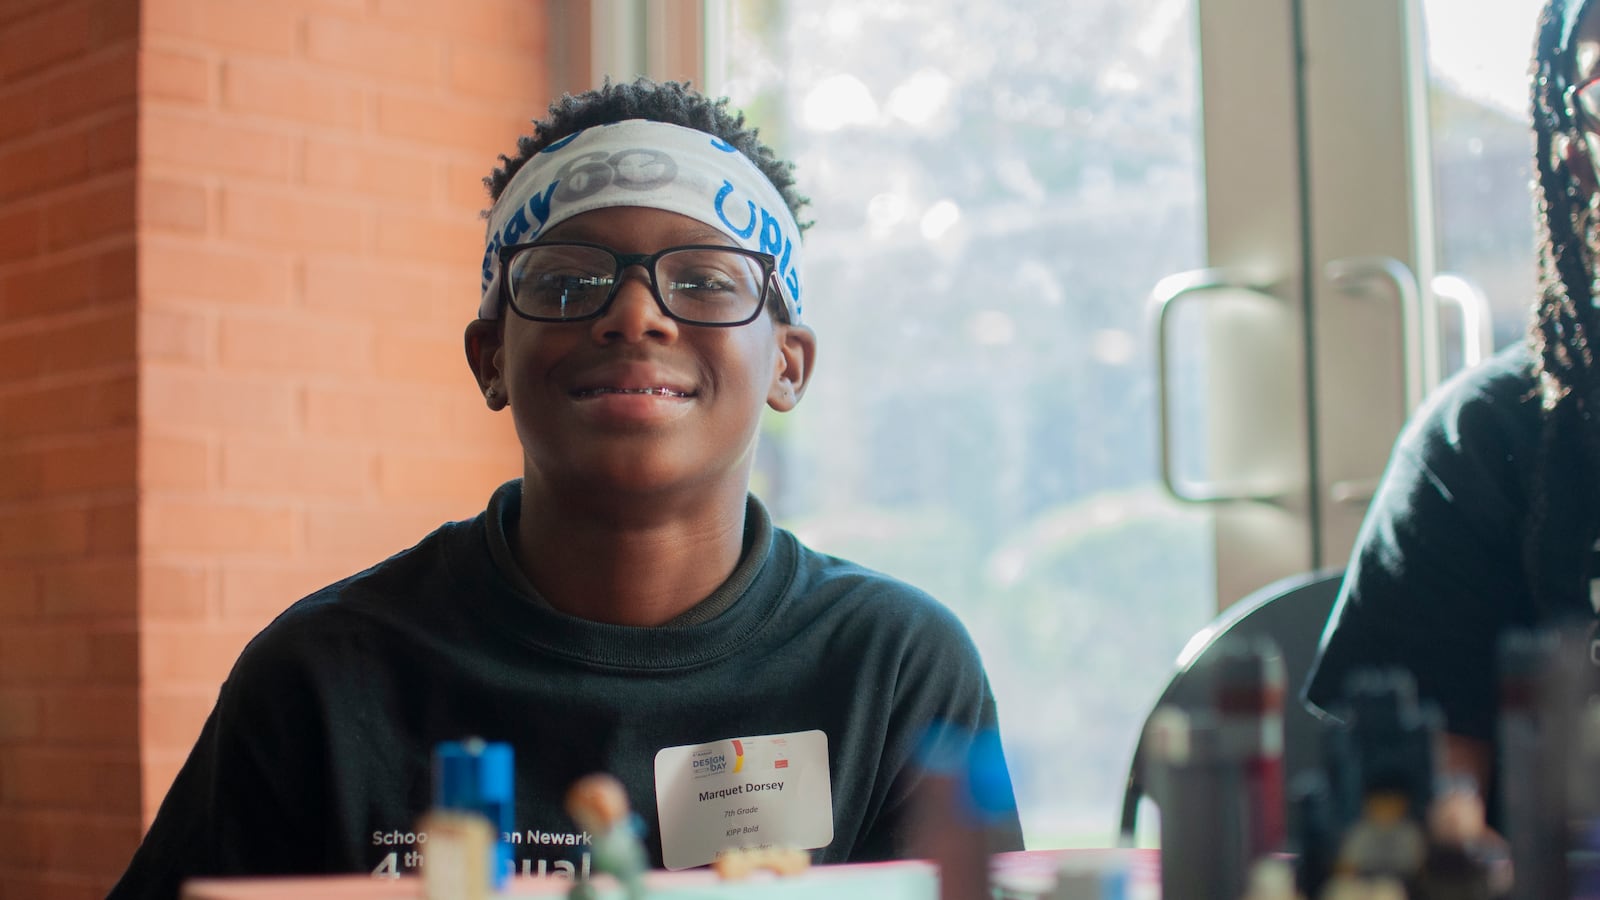 Marquet Dorsey, a seventh grader at KIPP Bold charter school, was a member of the team that won the "People's Choice" award at Design Day.